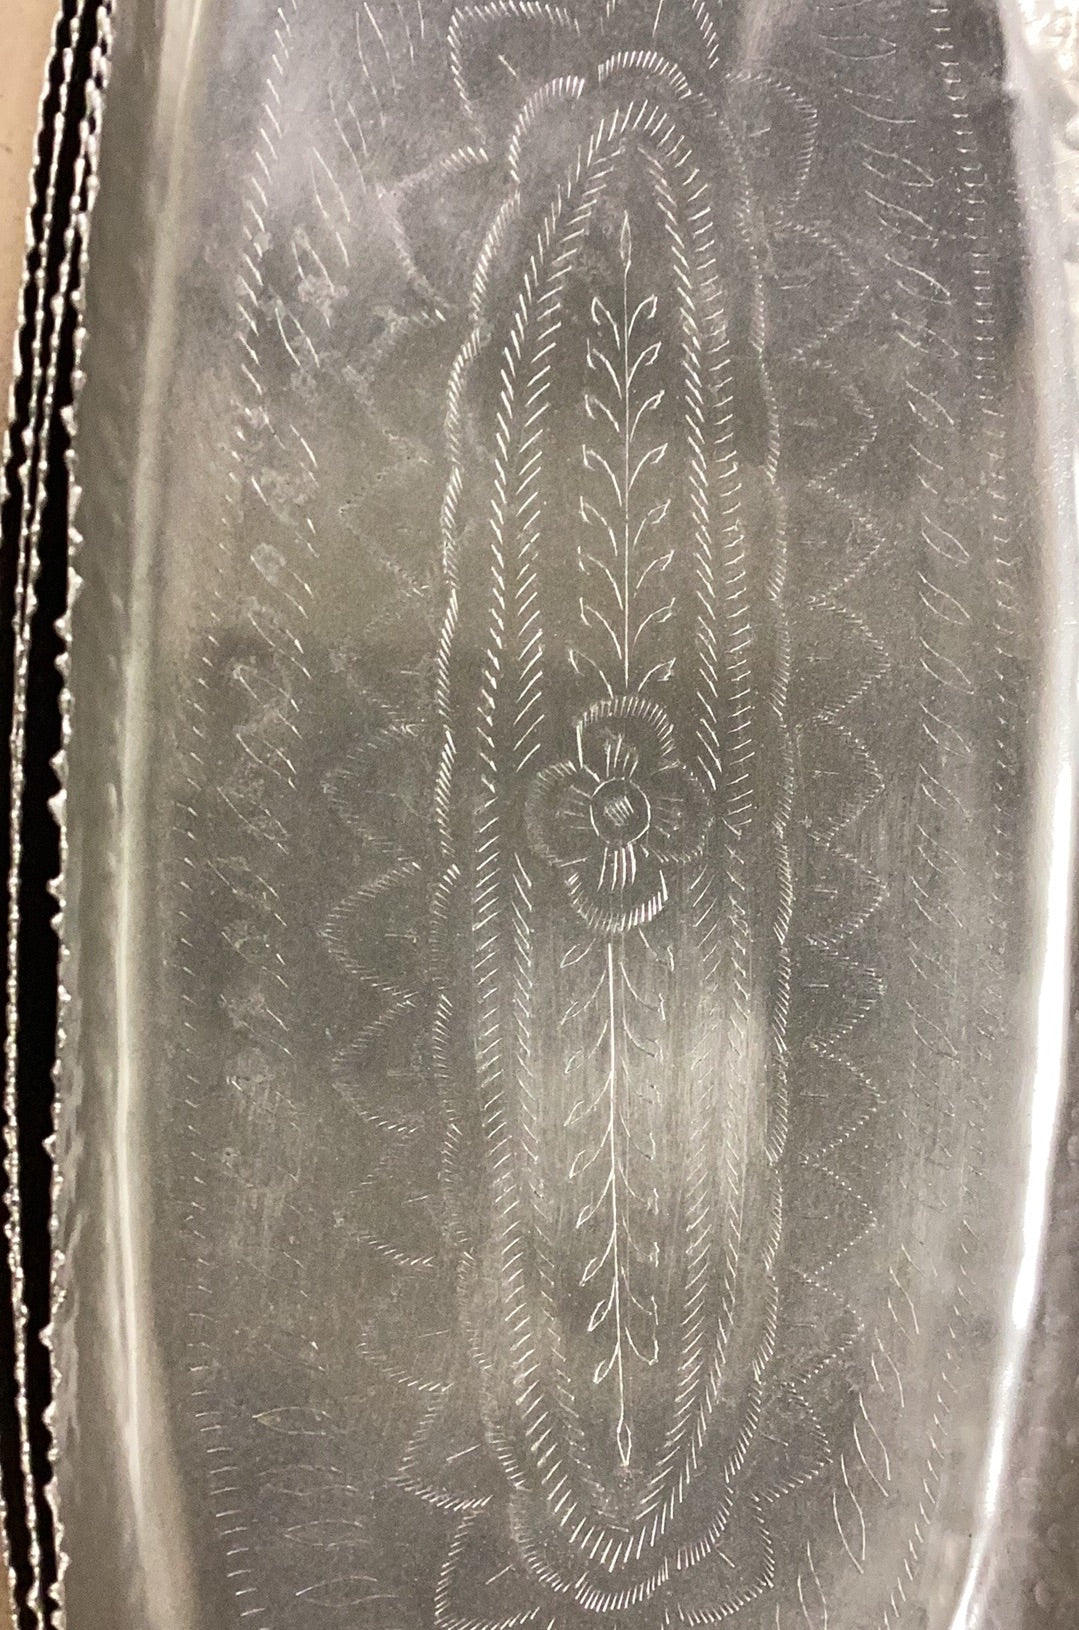 Metal tray with etched design